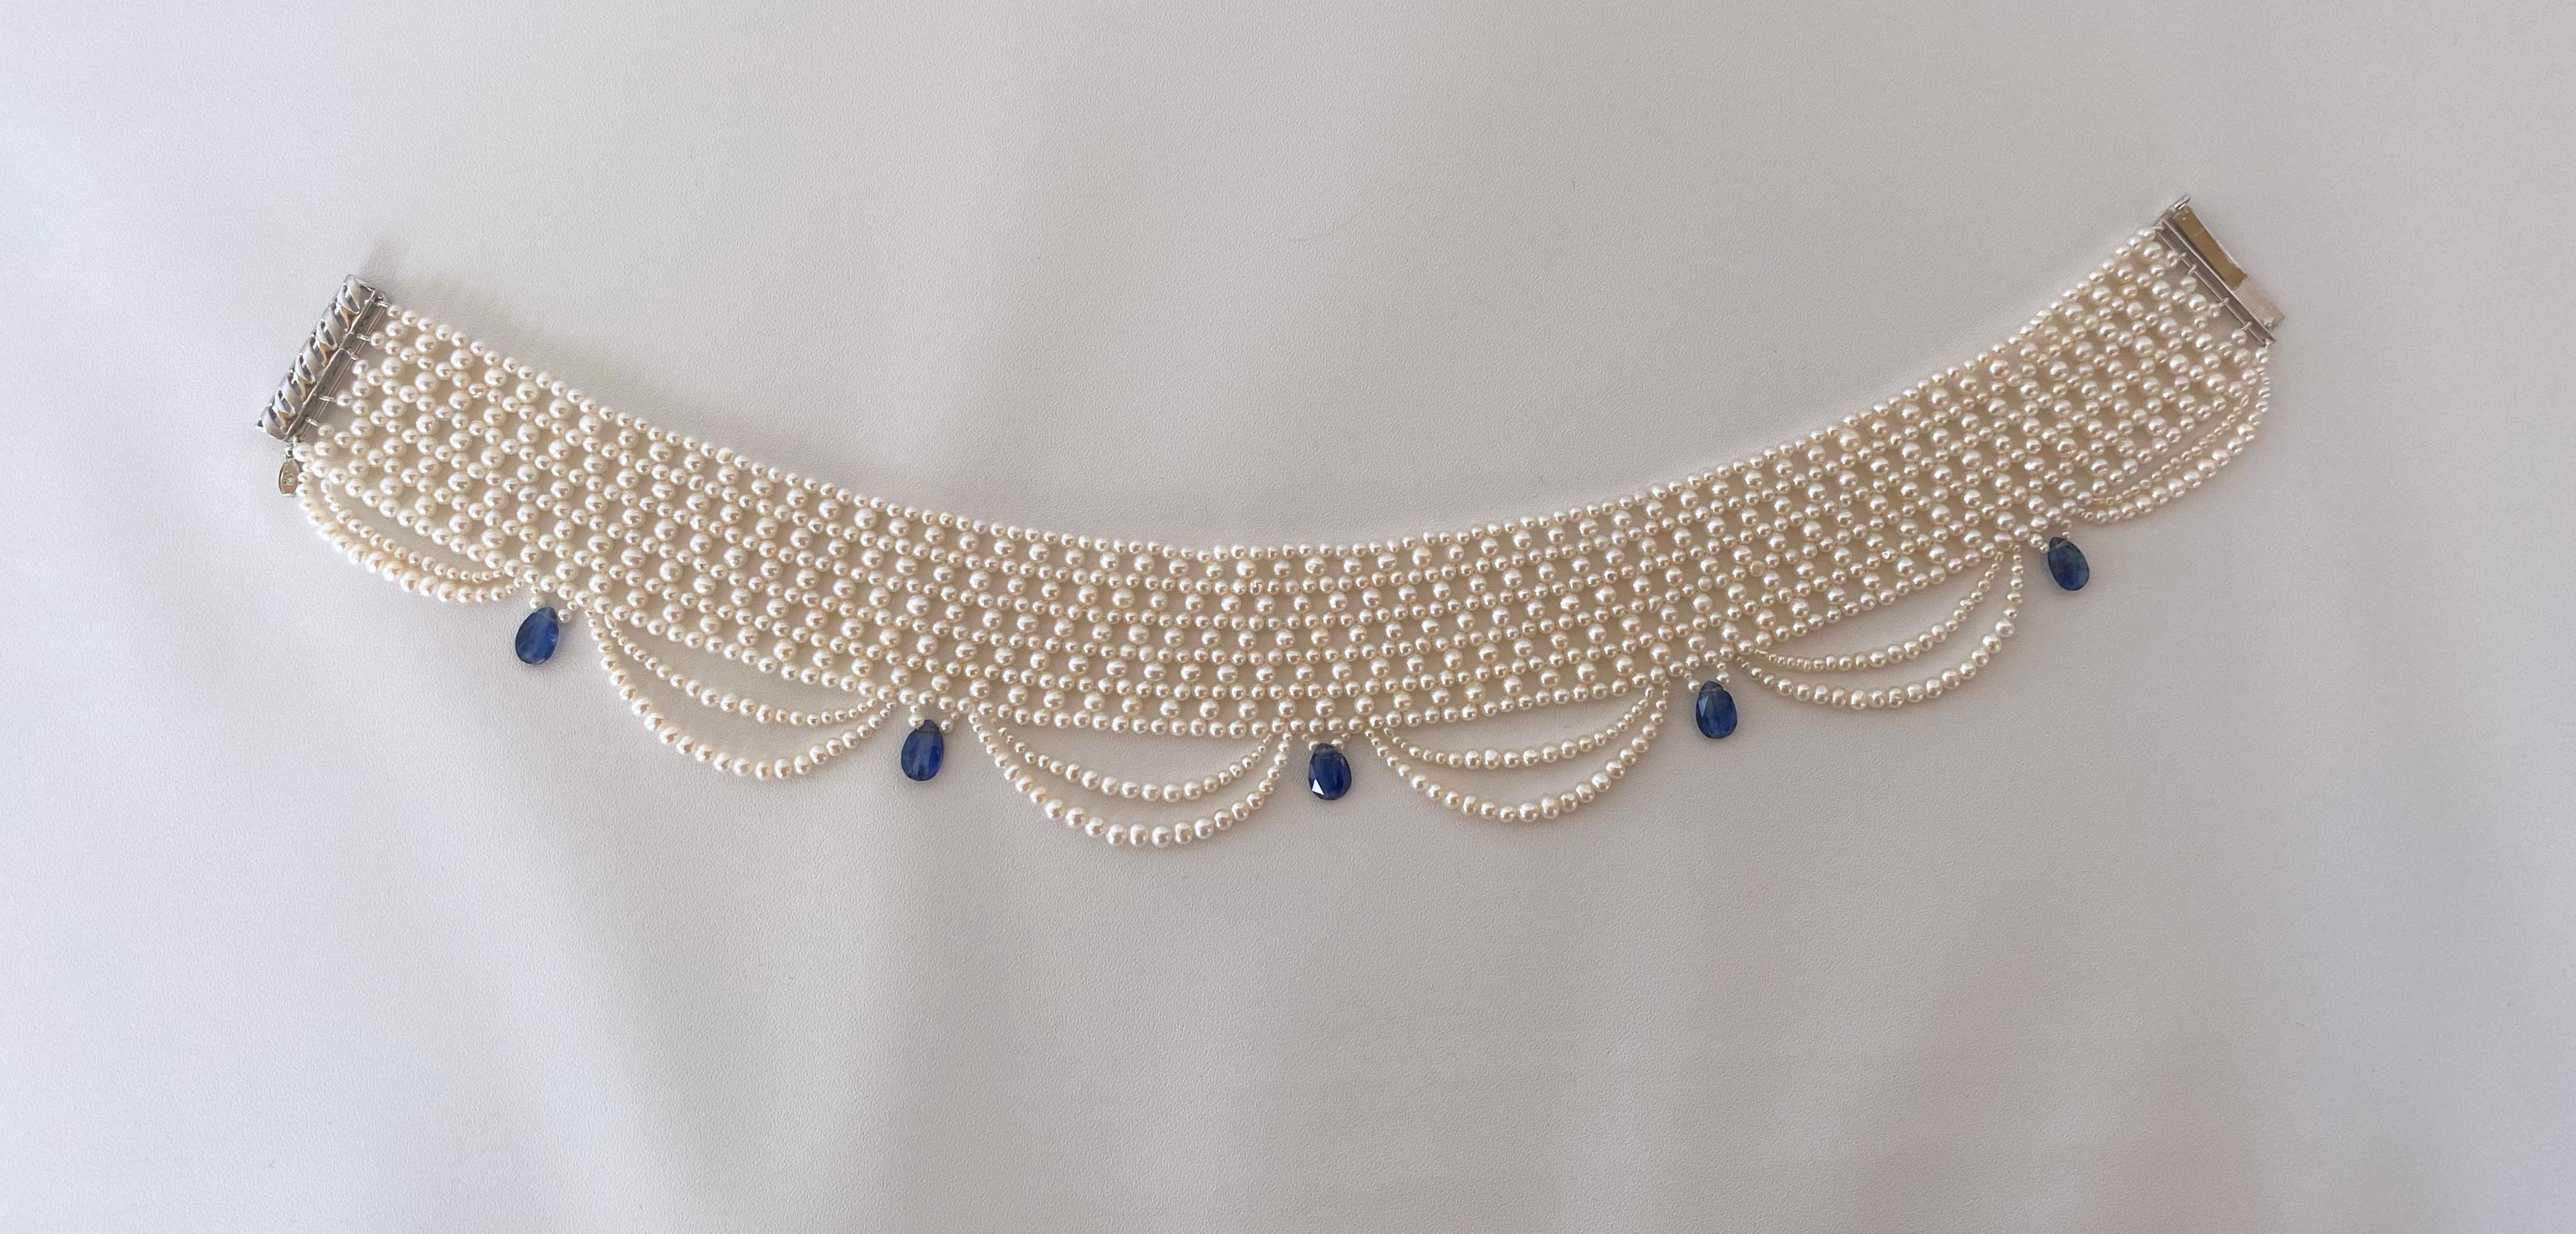 Hand woven Choker by Marina J. This romantic and delicate choker necklace is perfect for bridal or any other special occasion. Gorgeous Victorian inspired piece features all Cultured White Pearls with great sheen, intricately woven together into a